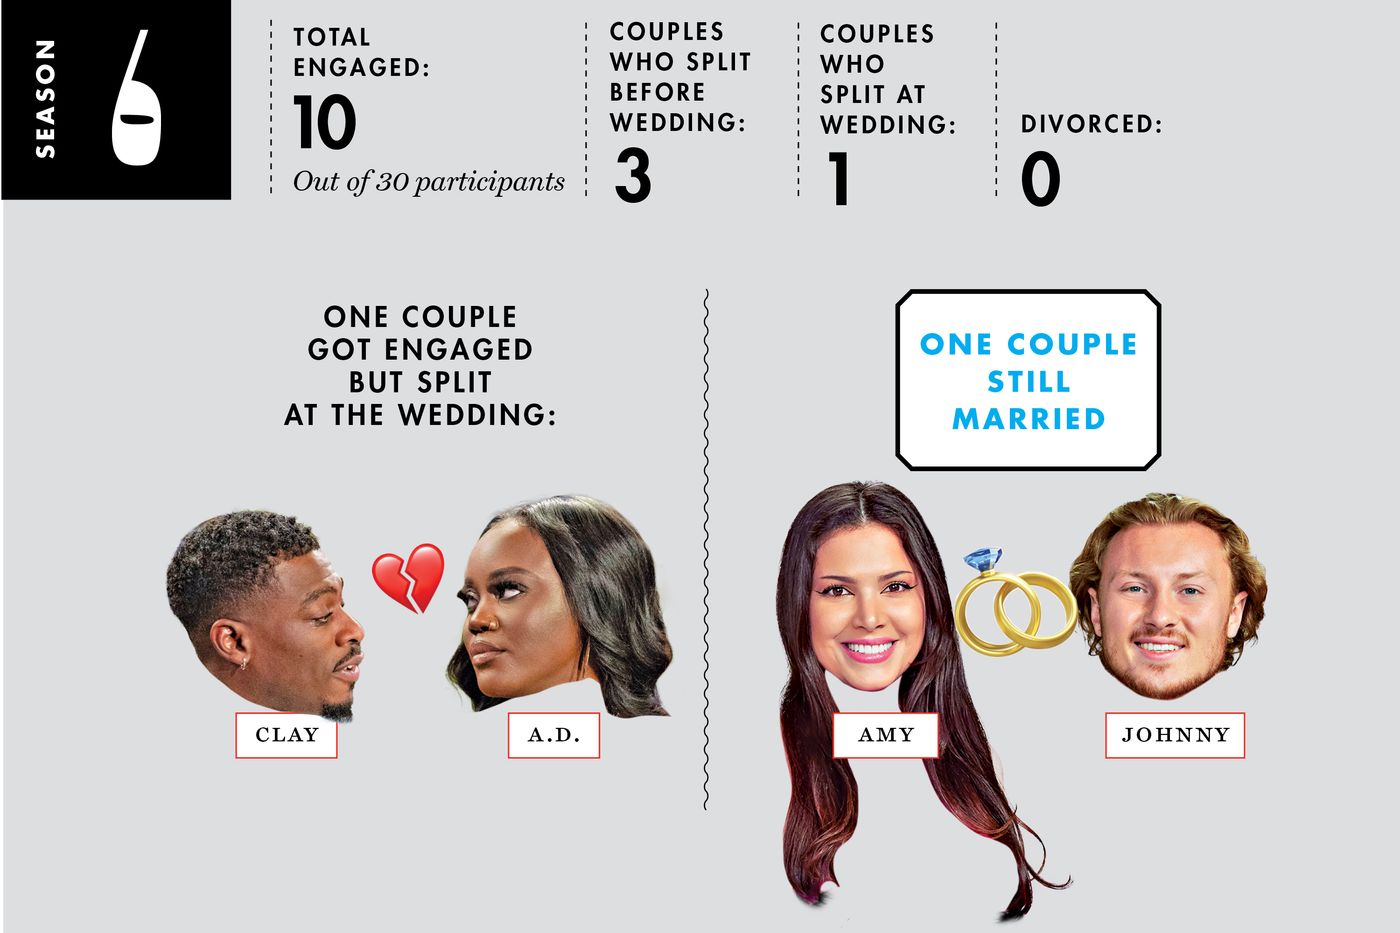 A photo-illustration about Love Is Blind season 6. Out of 30 participants: 10 got engaged, 3 couples split before the wedding, 1 couple split at the wedding, and 0 divorced. One couple got engaged but split at the wedding: Clay & A.D. One couple is still married: Amy and Johnny.